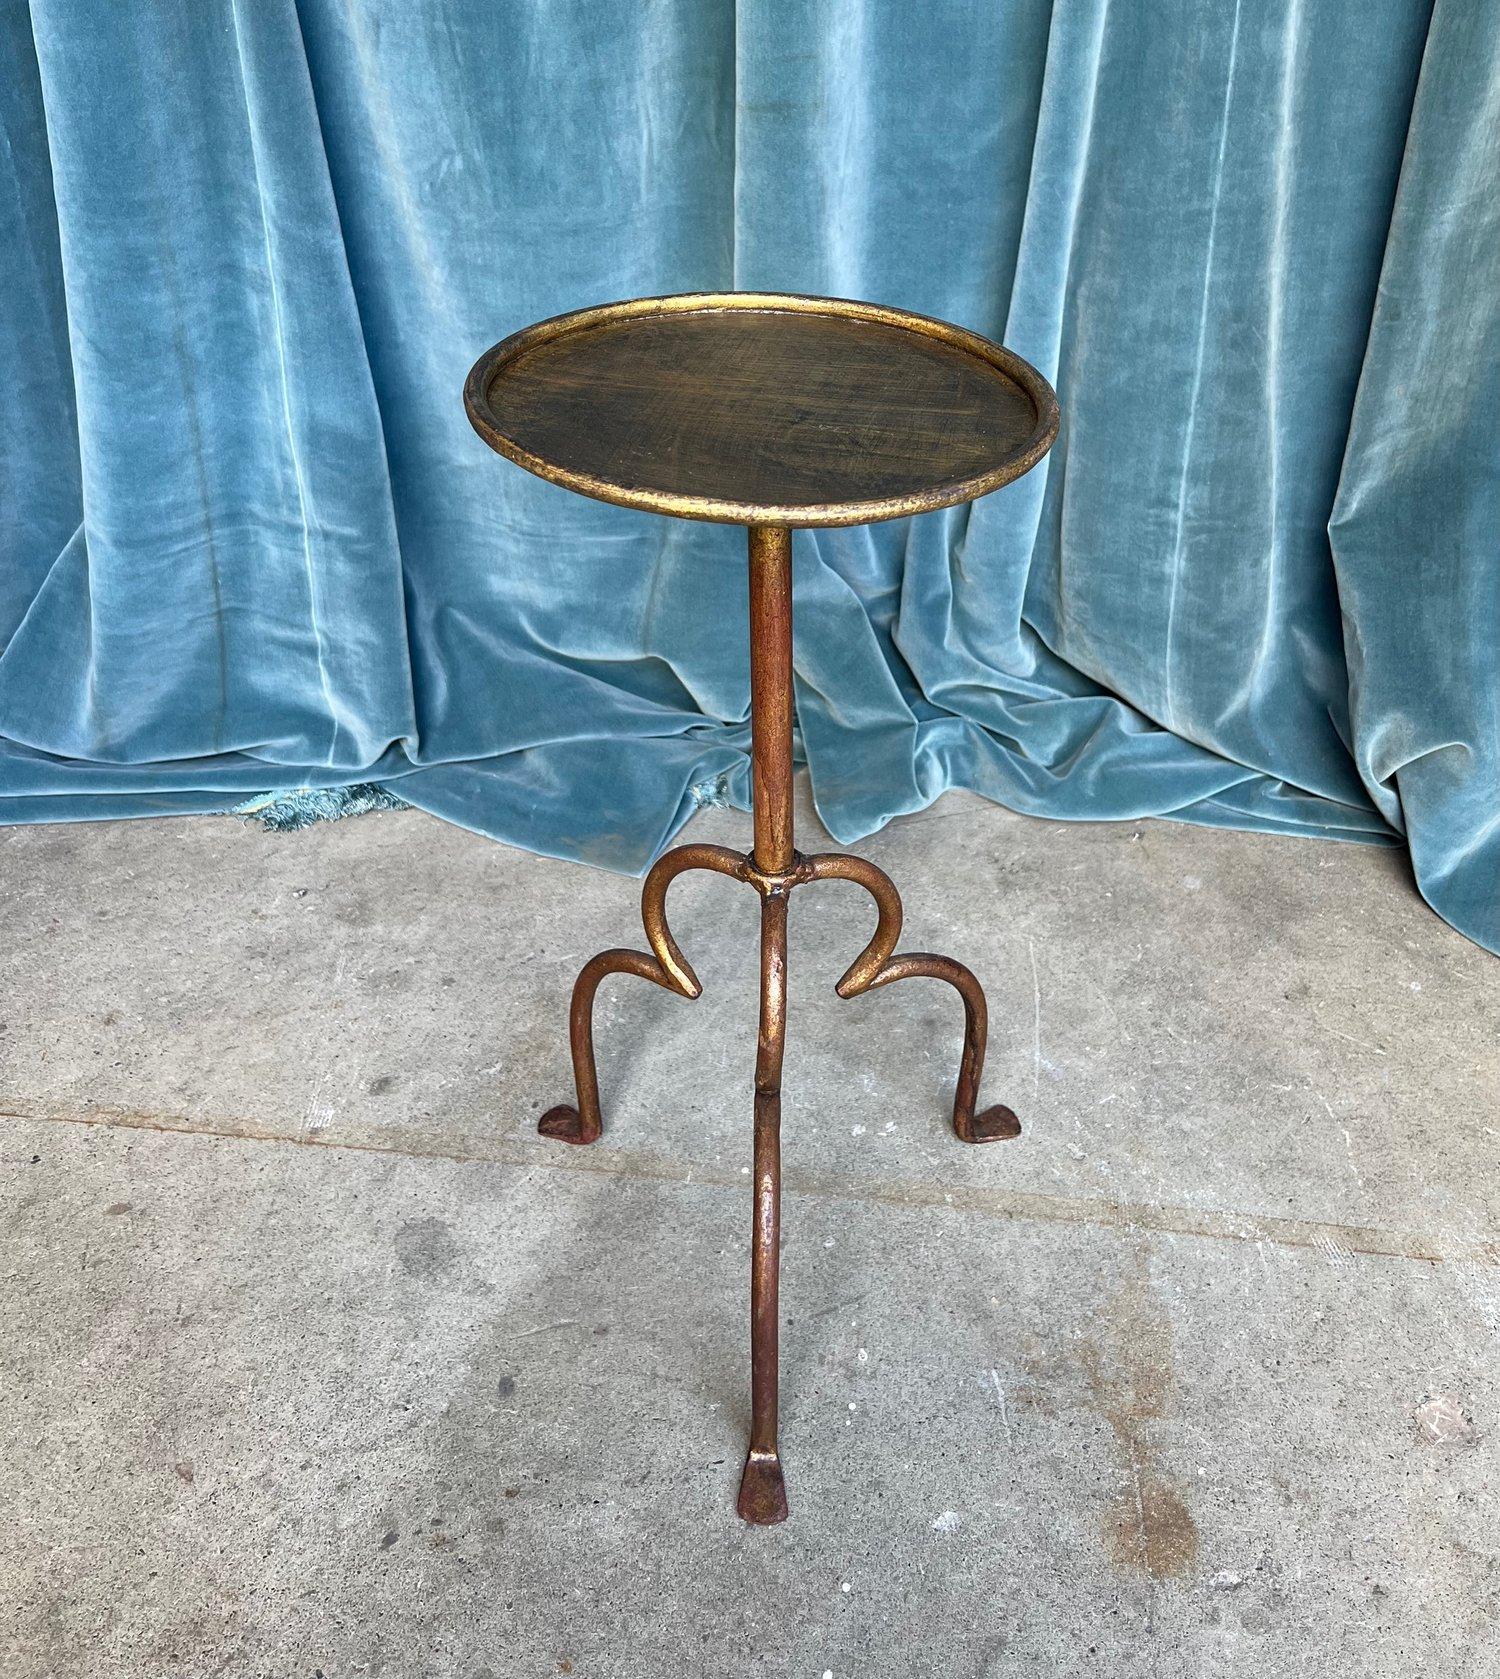 An elegant gilt iron drinks table with gracefully curved legs on a tripod base. The tripod base with its unusual design and hand-applied gold patina with red undertones adds a touch of elegance to any room. This unique side table dates back to the